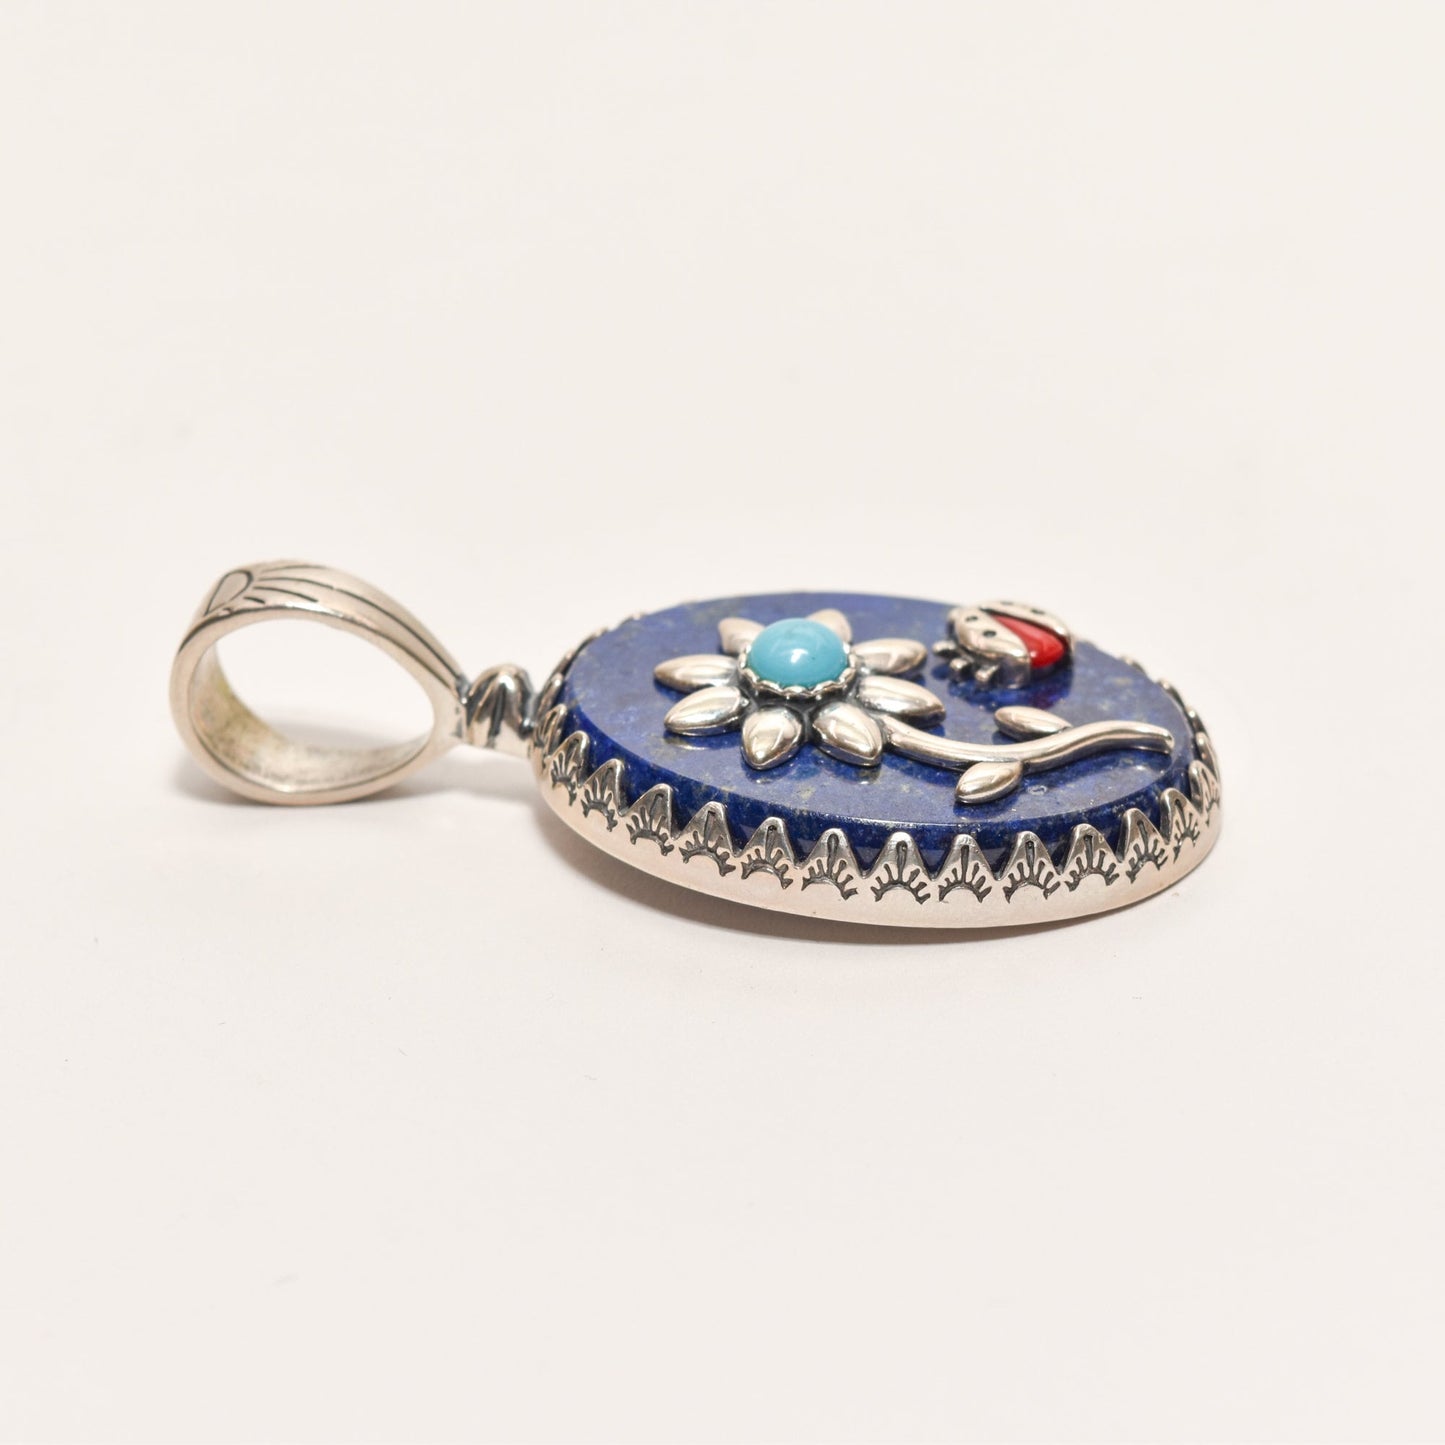 Sterling Silver Lapis Lazuli, Turquoise, Coral, Flower Ladybug Pendant, Veronica Dine For Carolyn Pollack